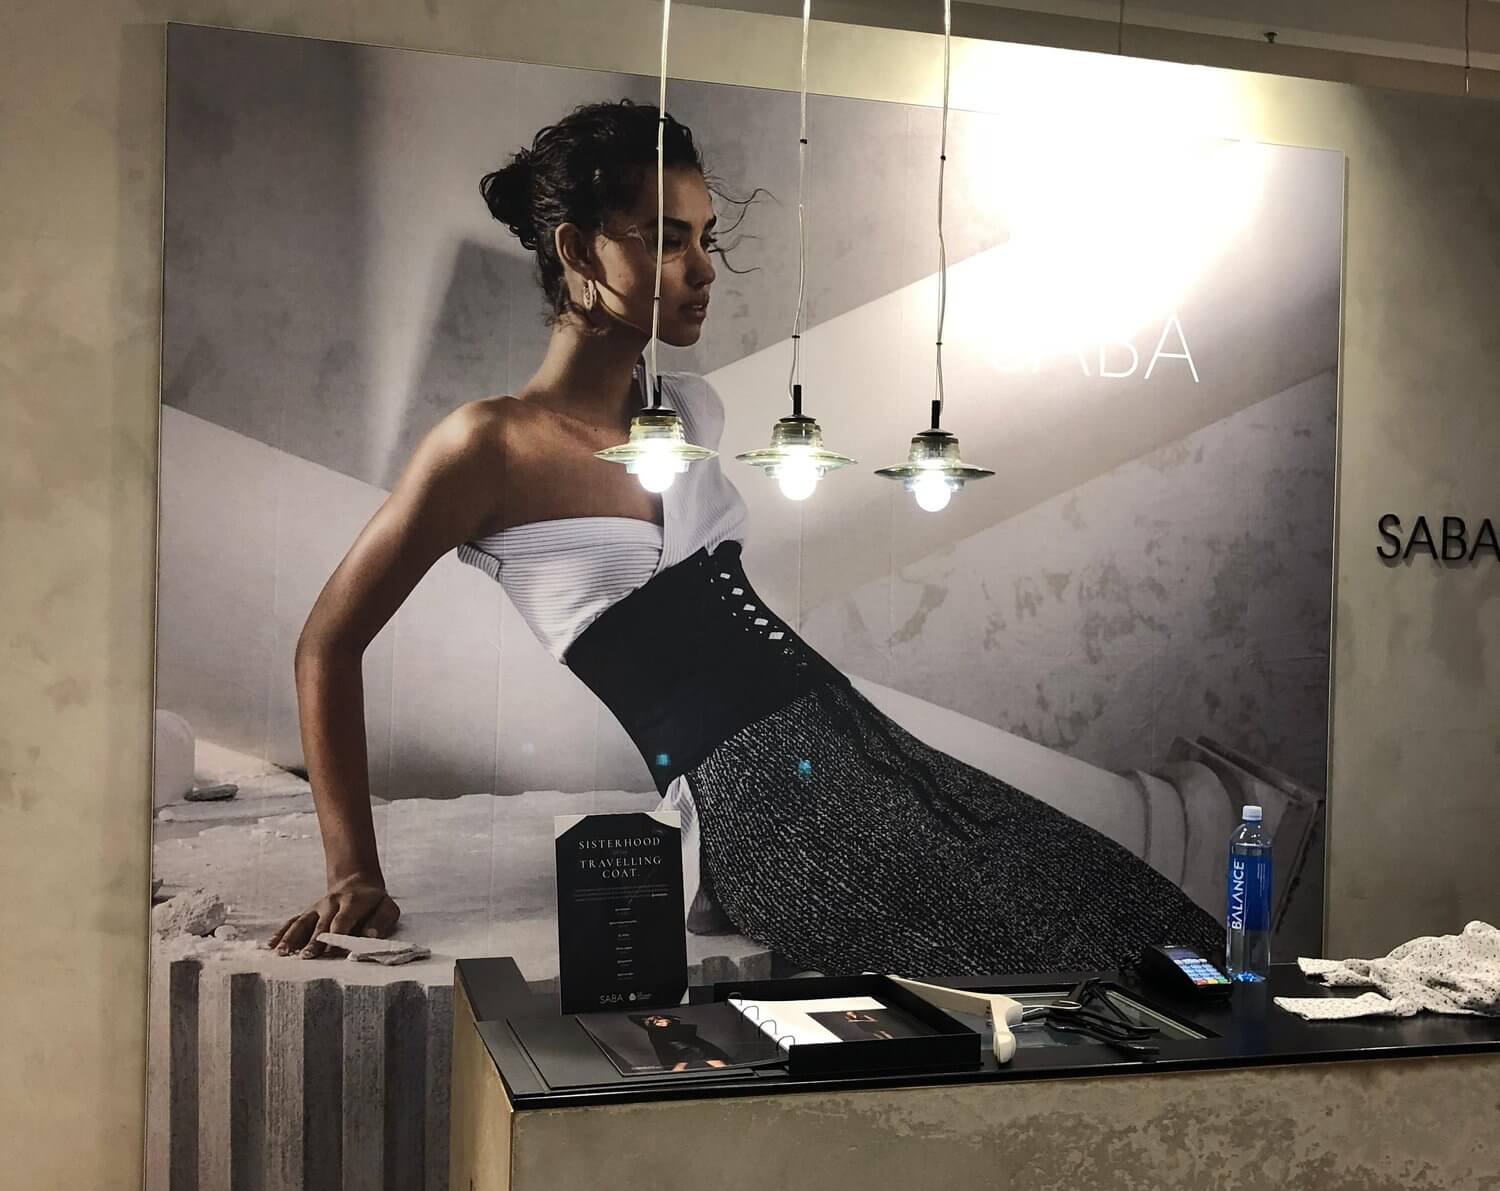 SABA in-store counter with model printed on a poster.